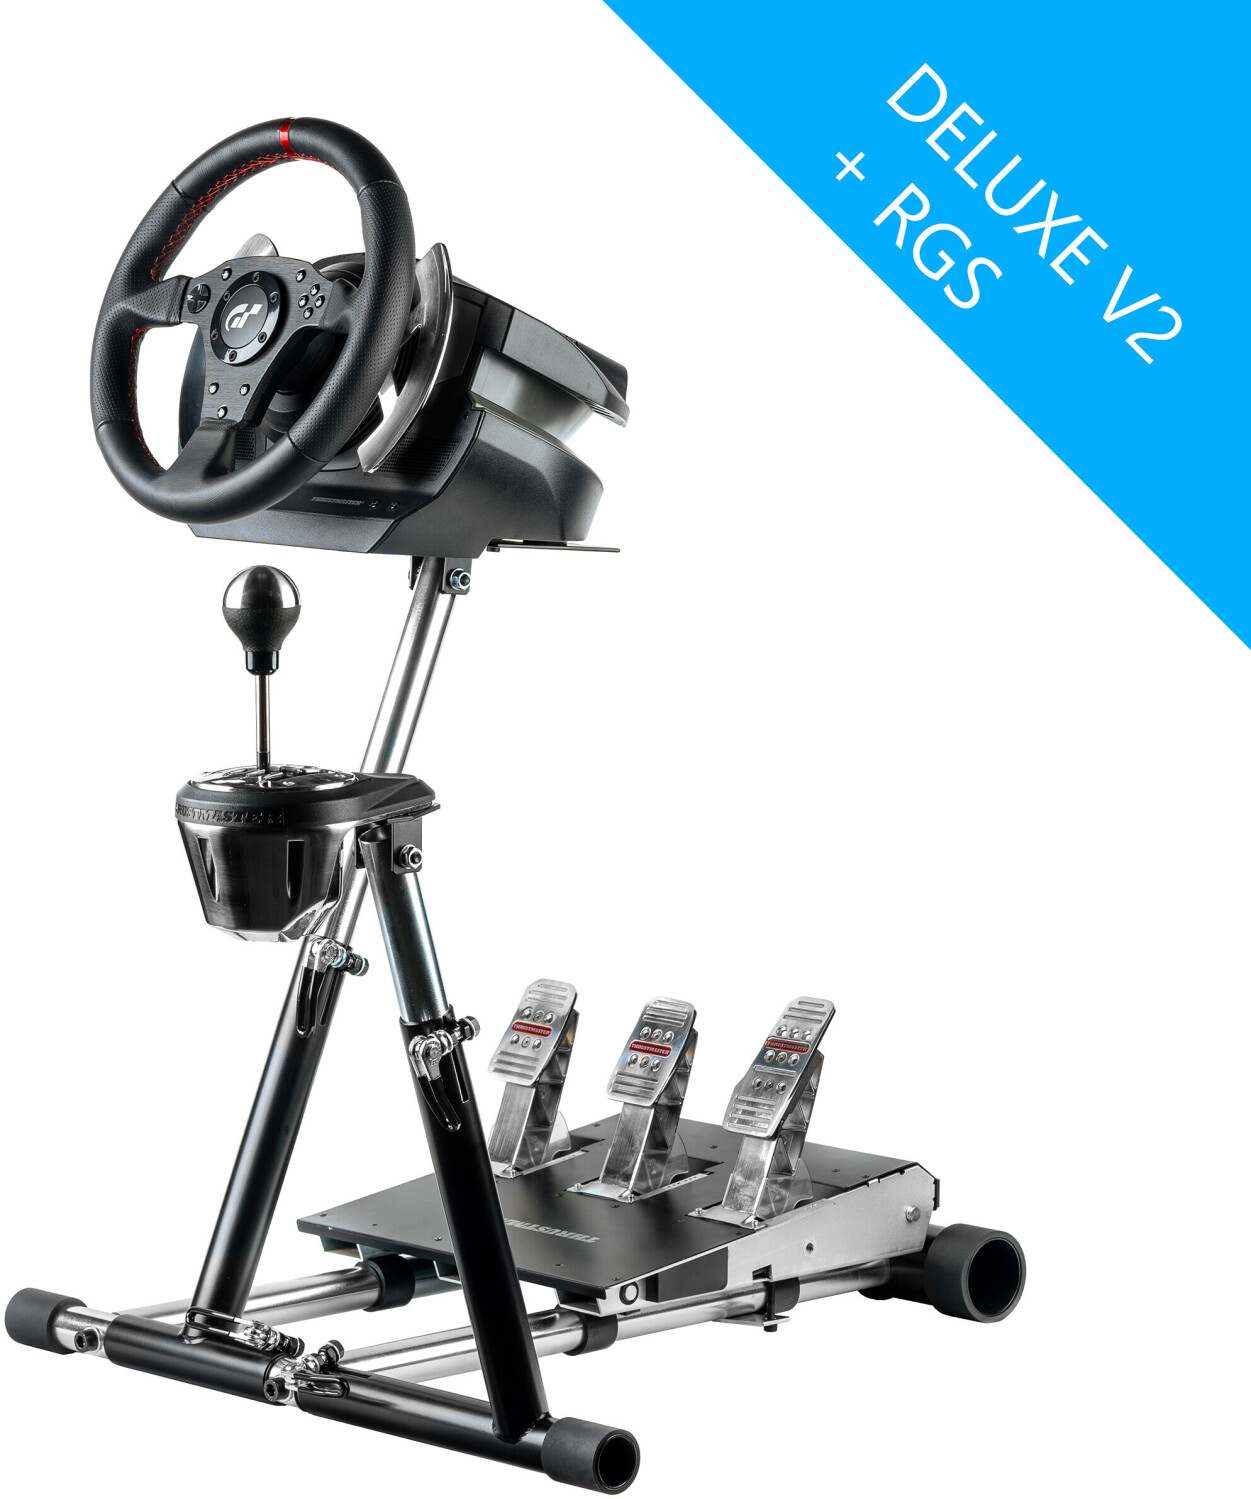 Wheel stand pro Wheel Stand Pro für Thrustmaster T300RS/TX/T150/TMX + RGS +  GTS - Deluxe V2 ab 129,59 €